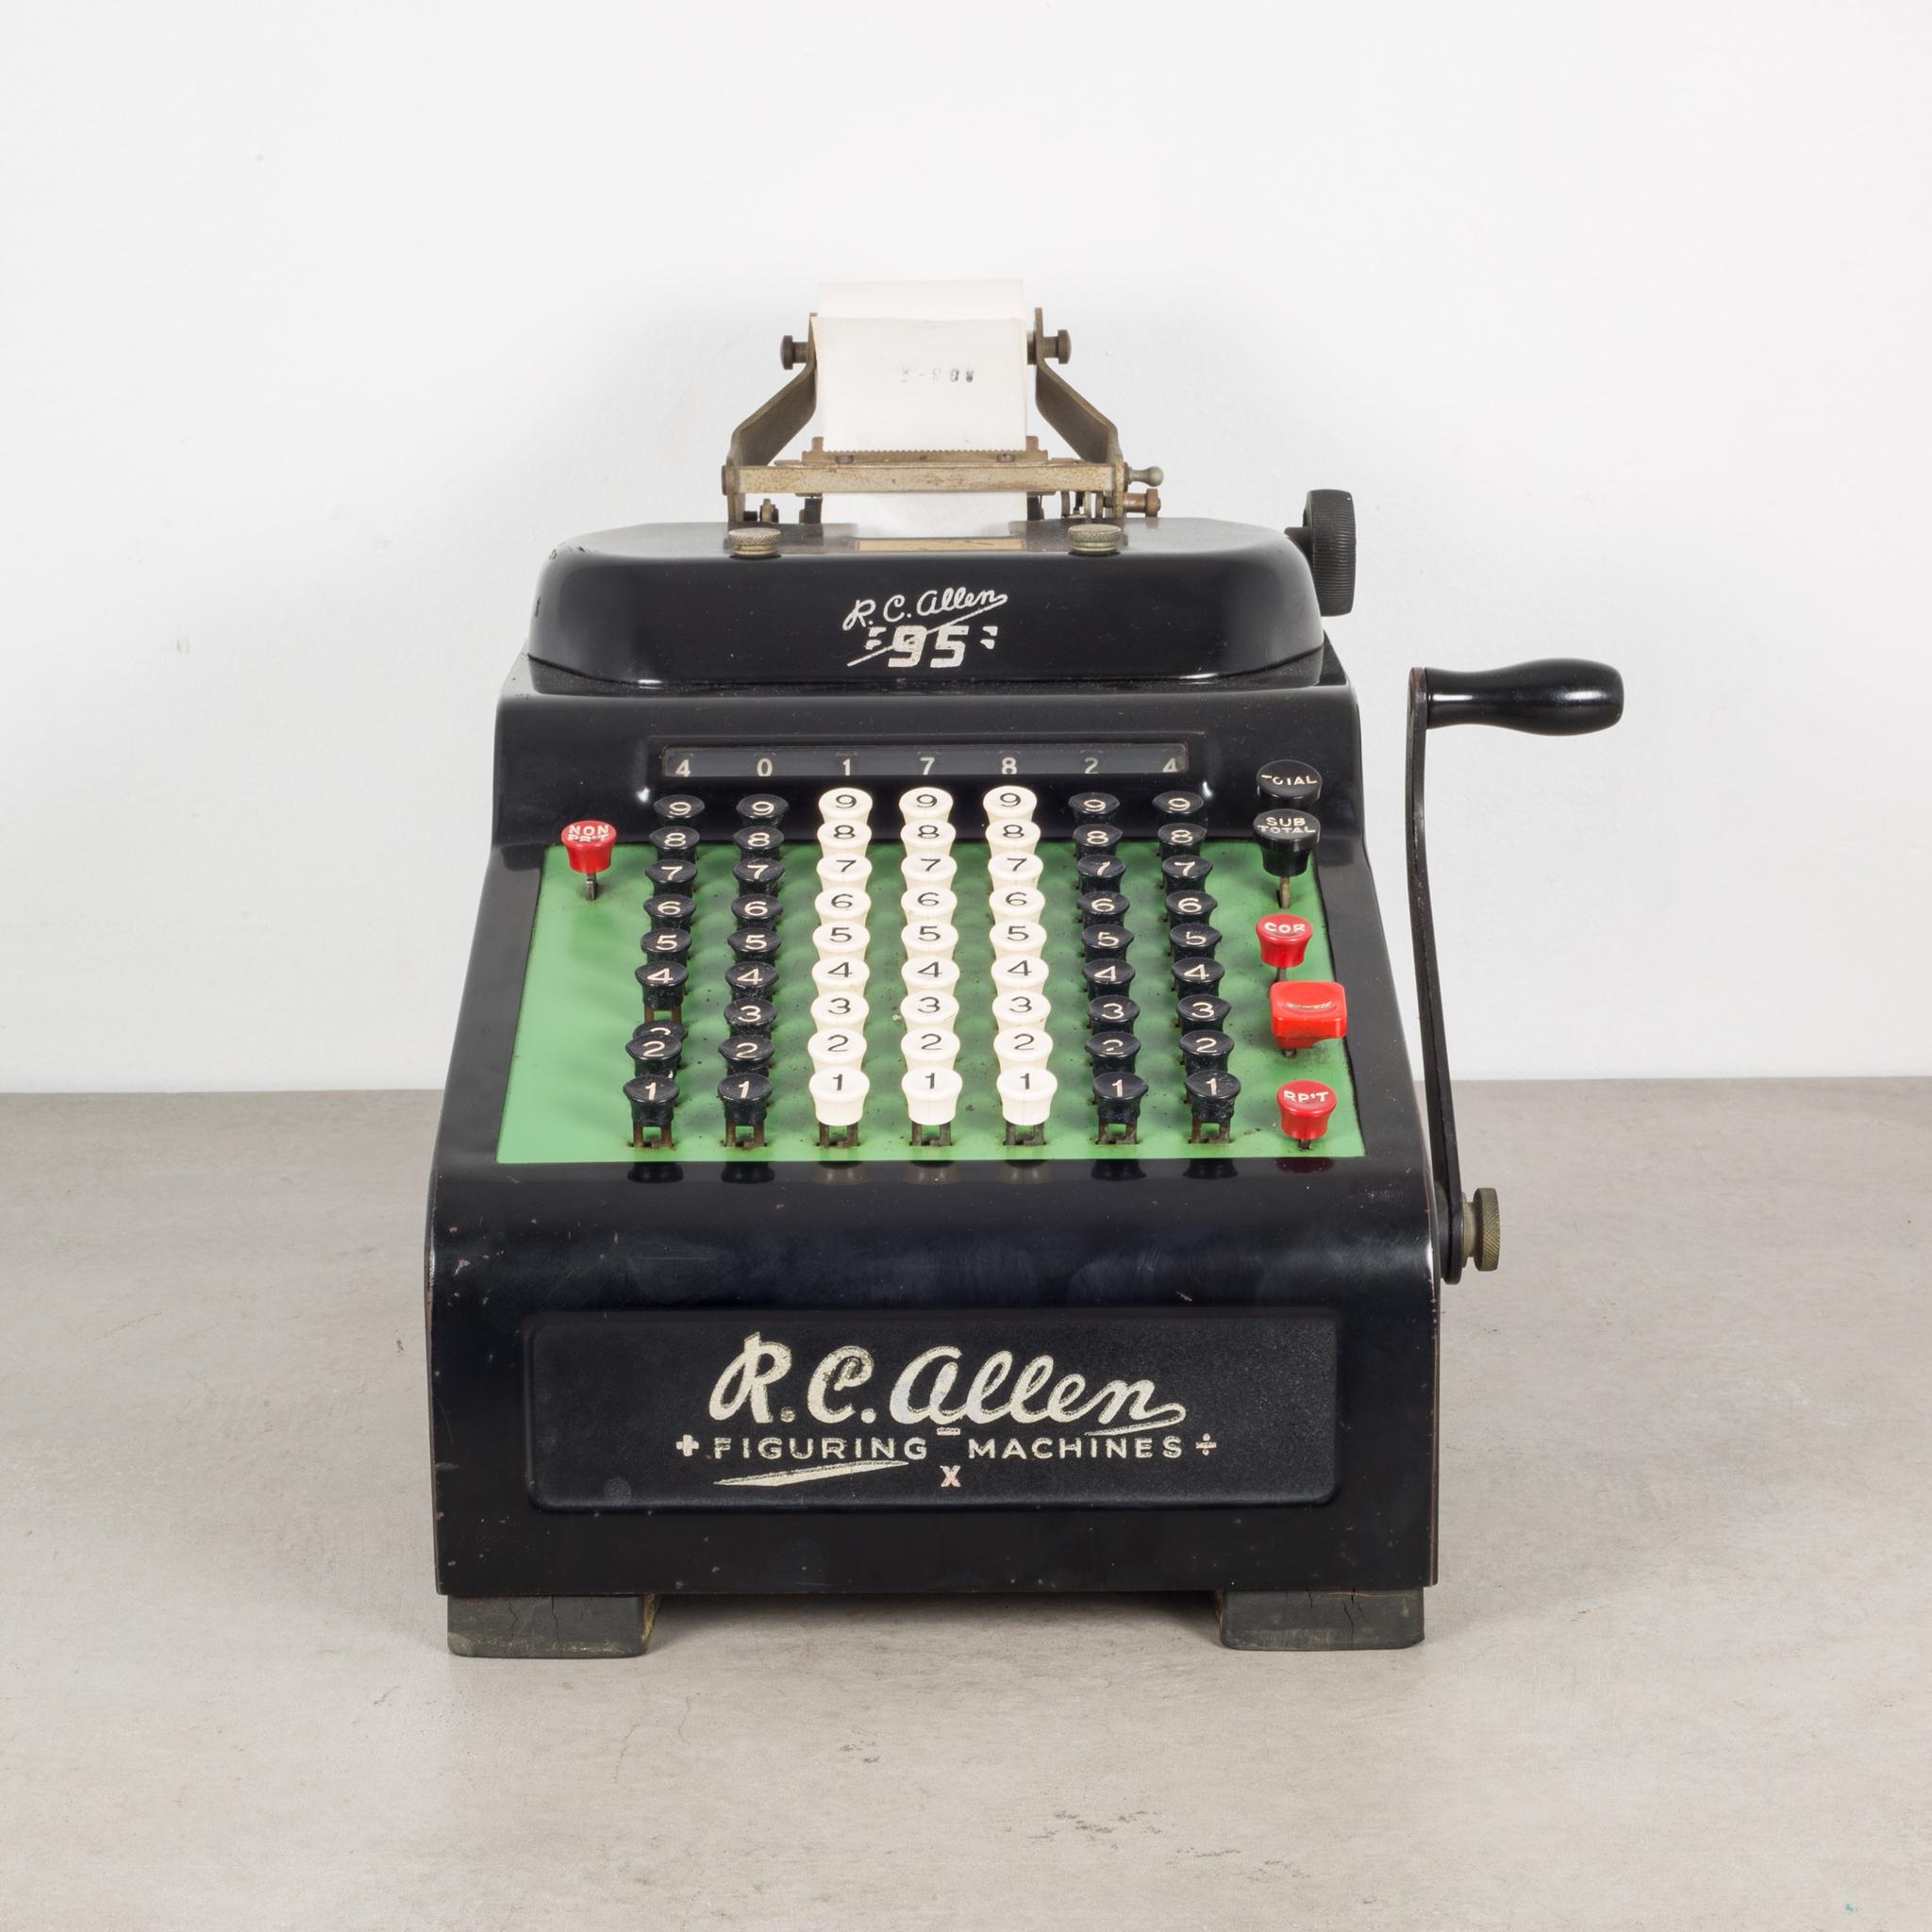 About:
The is an antique metal and Bakelite figuring (adding) machine by R.C. Allen, model 95. The body is Bakelite, metal, and wood on the handle. The lever pulls forward and back working the inner mechanisms but doesn't print on the paper. A